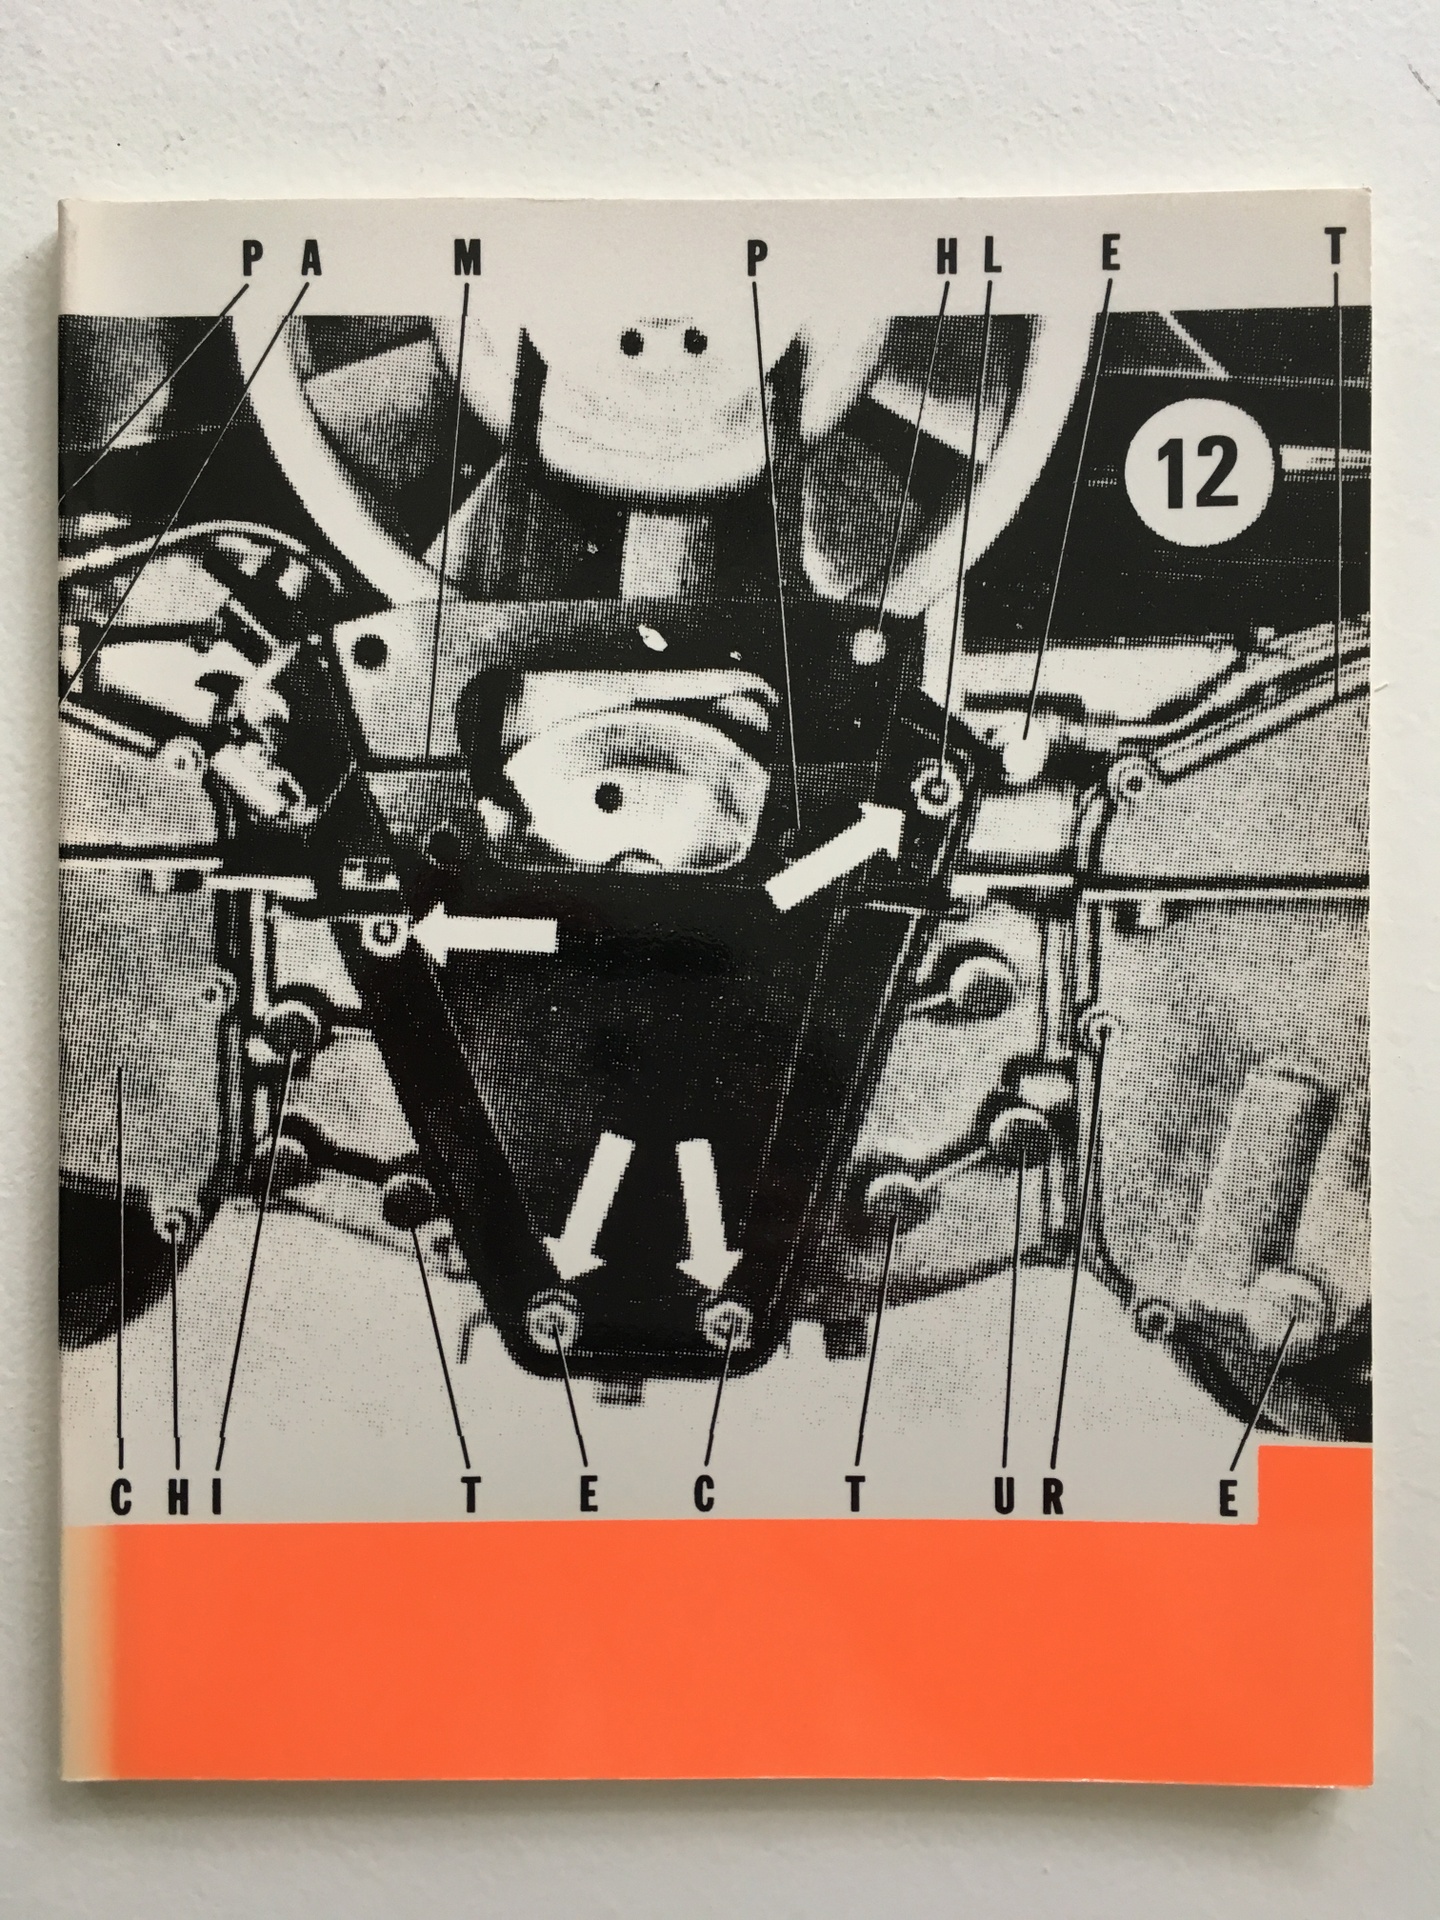 Cover of Building Machines, Pamphlet Architecture 12, featuring a black and white gear-like illustration with an orange bar at the bottom.